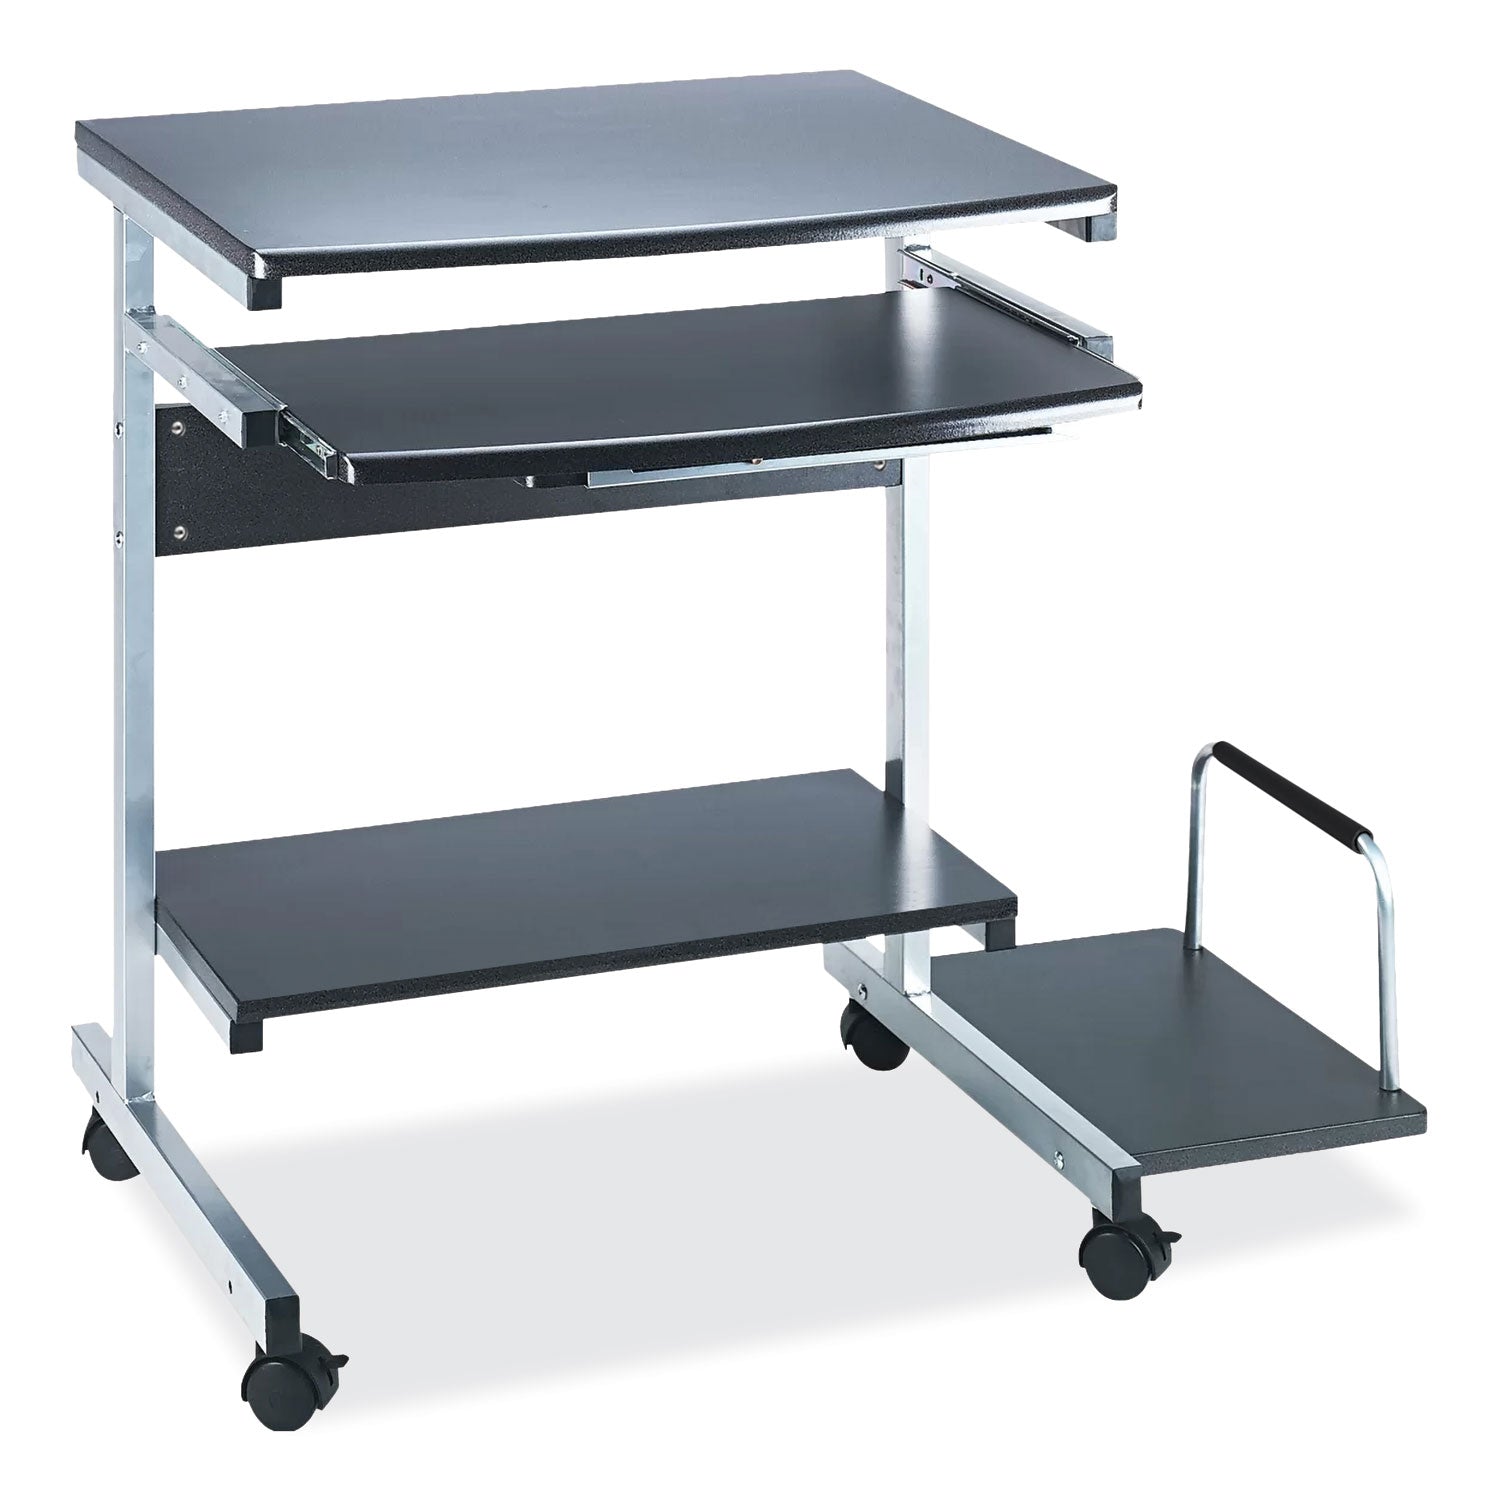 eastwinds-series-portrait-pc-desk-cart-36-x-1925-x-31-anthracite-ships-in-1-3-business-days_saf946ant - 1